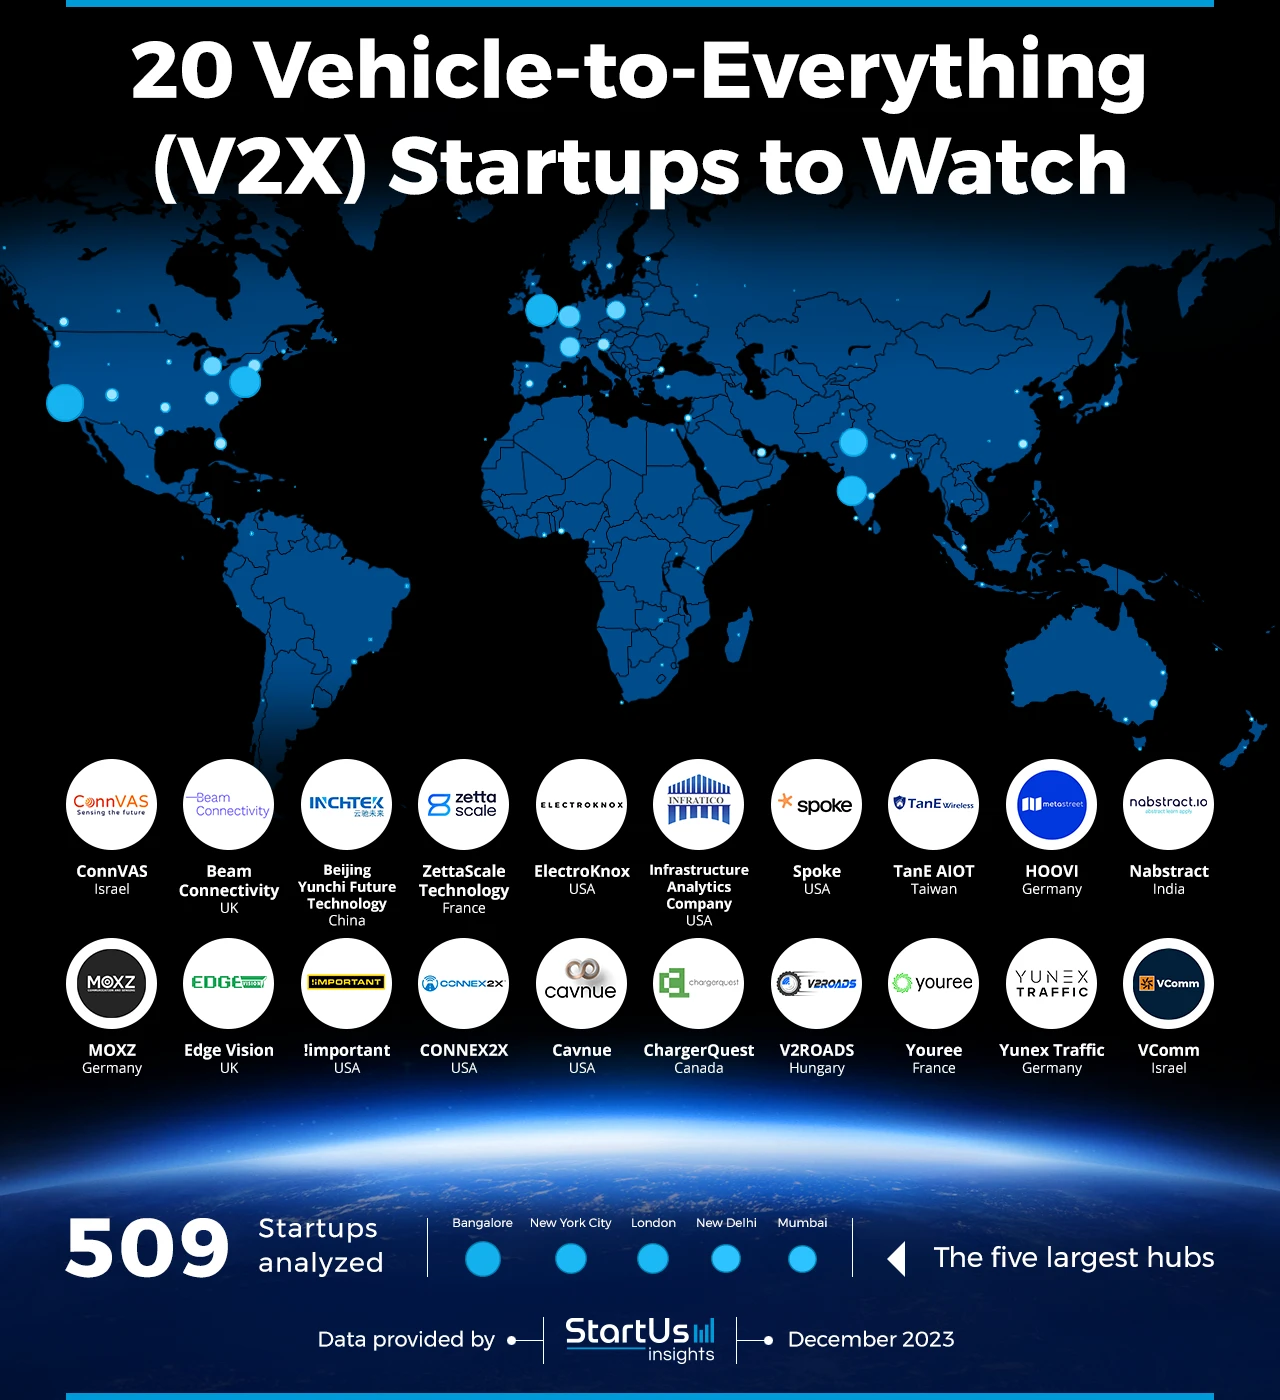 Vehicle-to-Everything-Startups-to-Watch-Heat-Map-StartUs-Insights-noresize